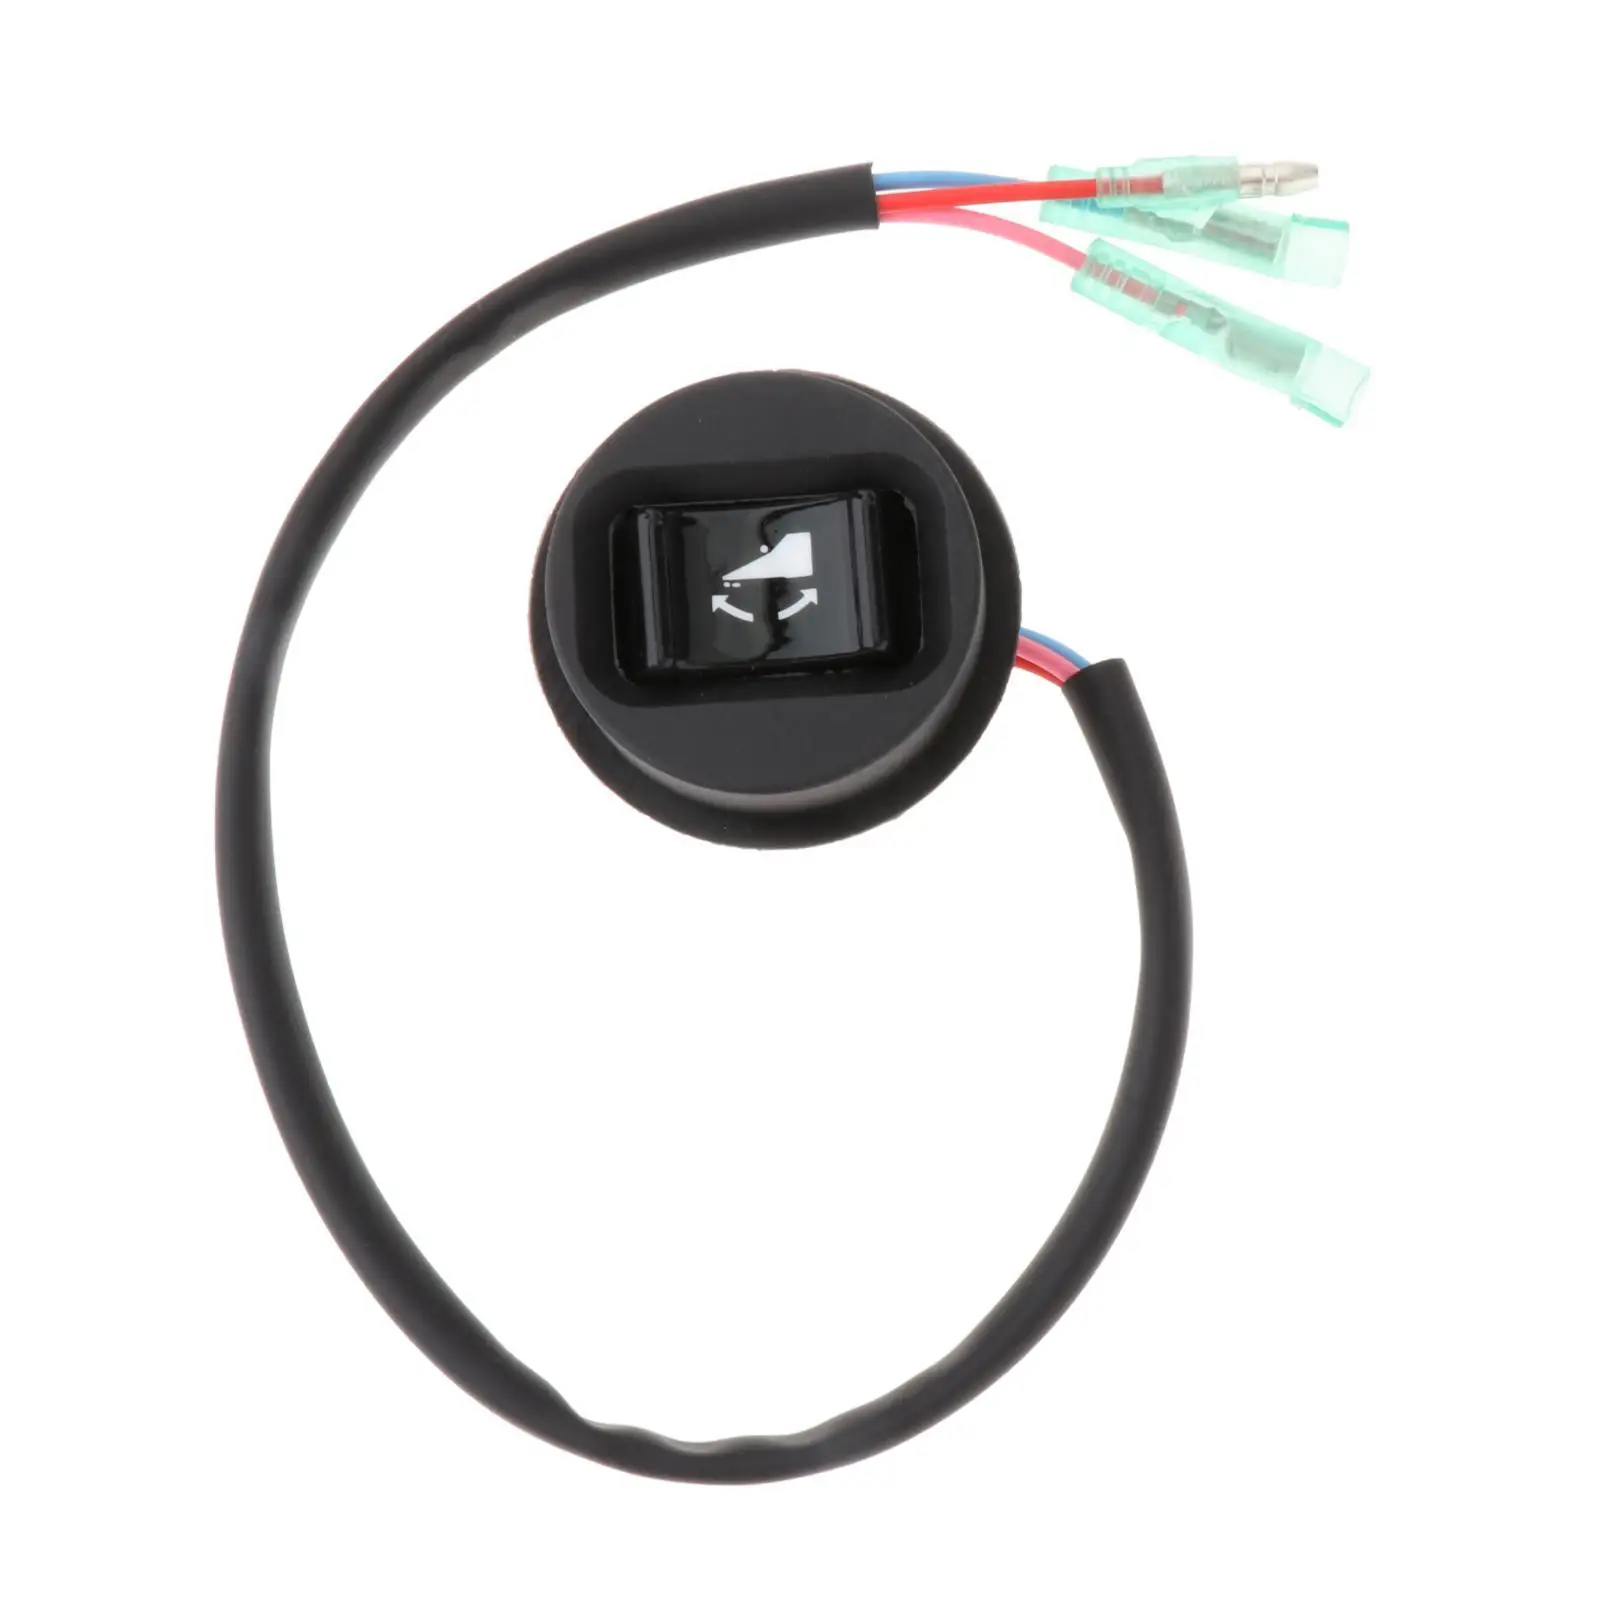 Power Tilt Trim Switch Fit for Tohatsu Outboard Motor 25HP 70HP Parts Easy to Install